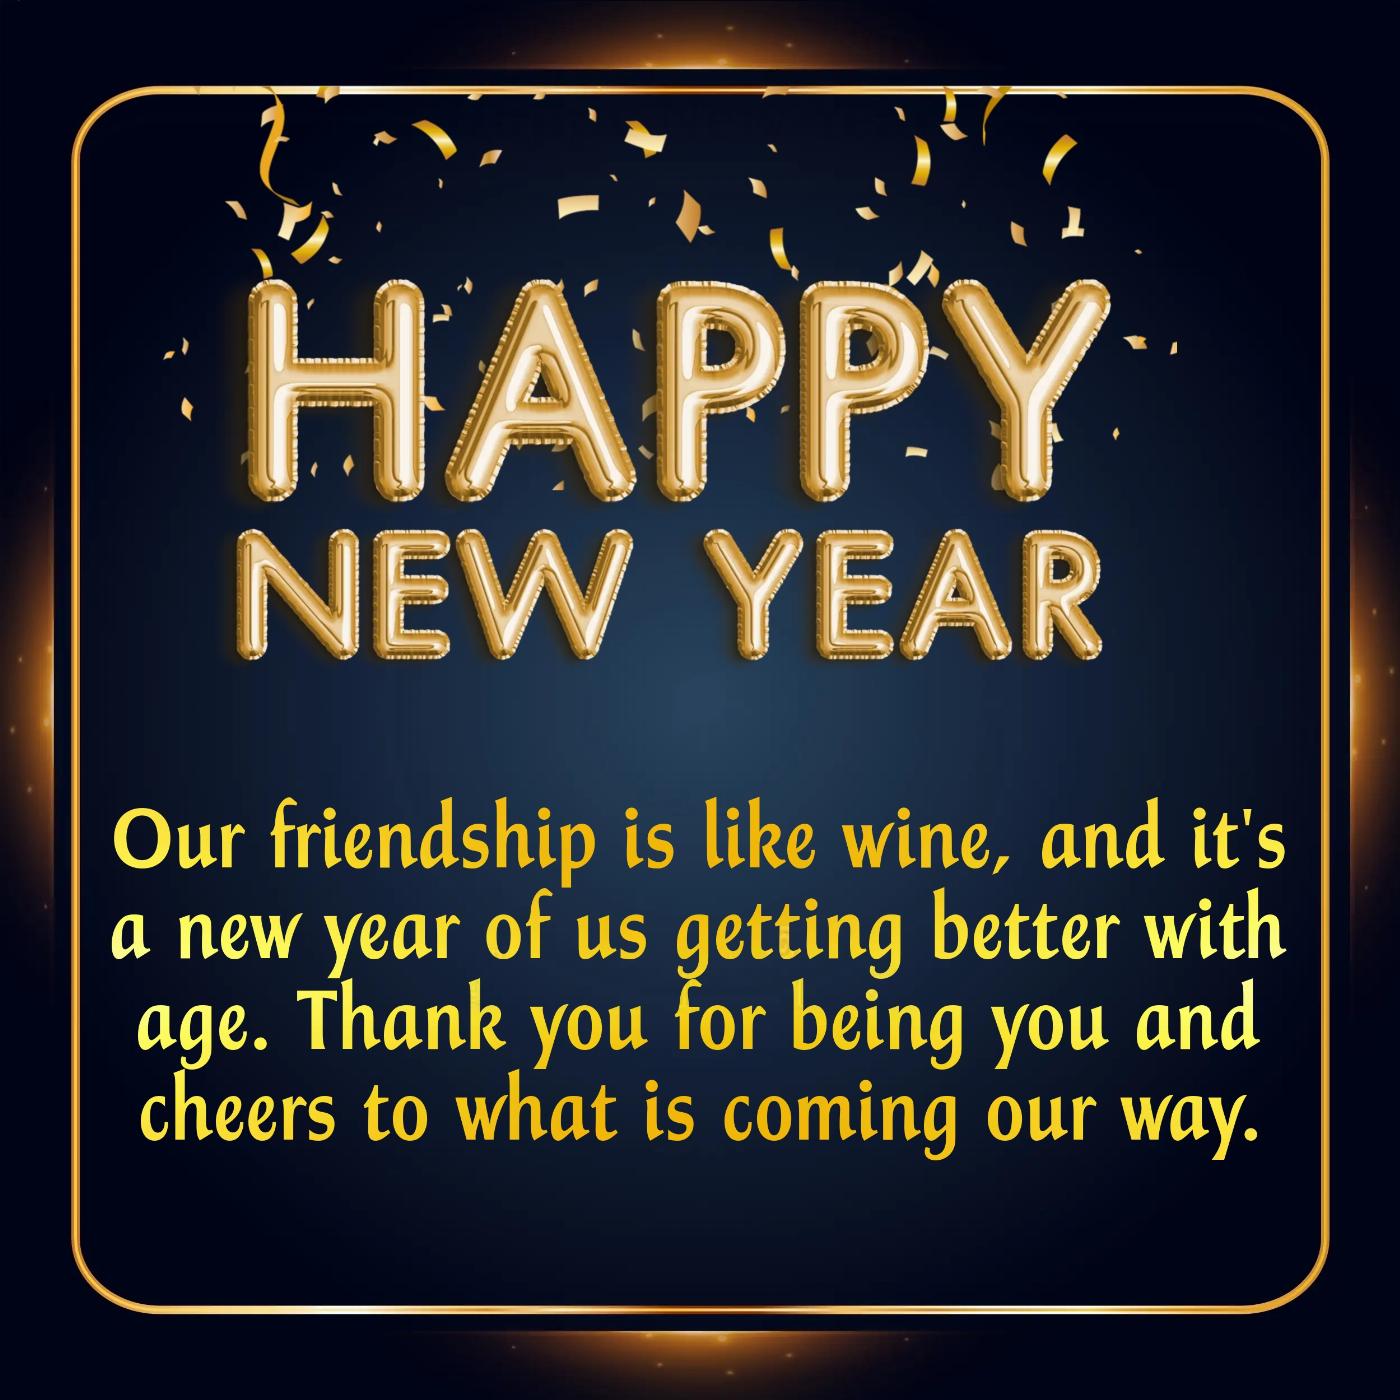 Our friendship is like wine and it's a new year of us getting better